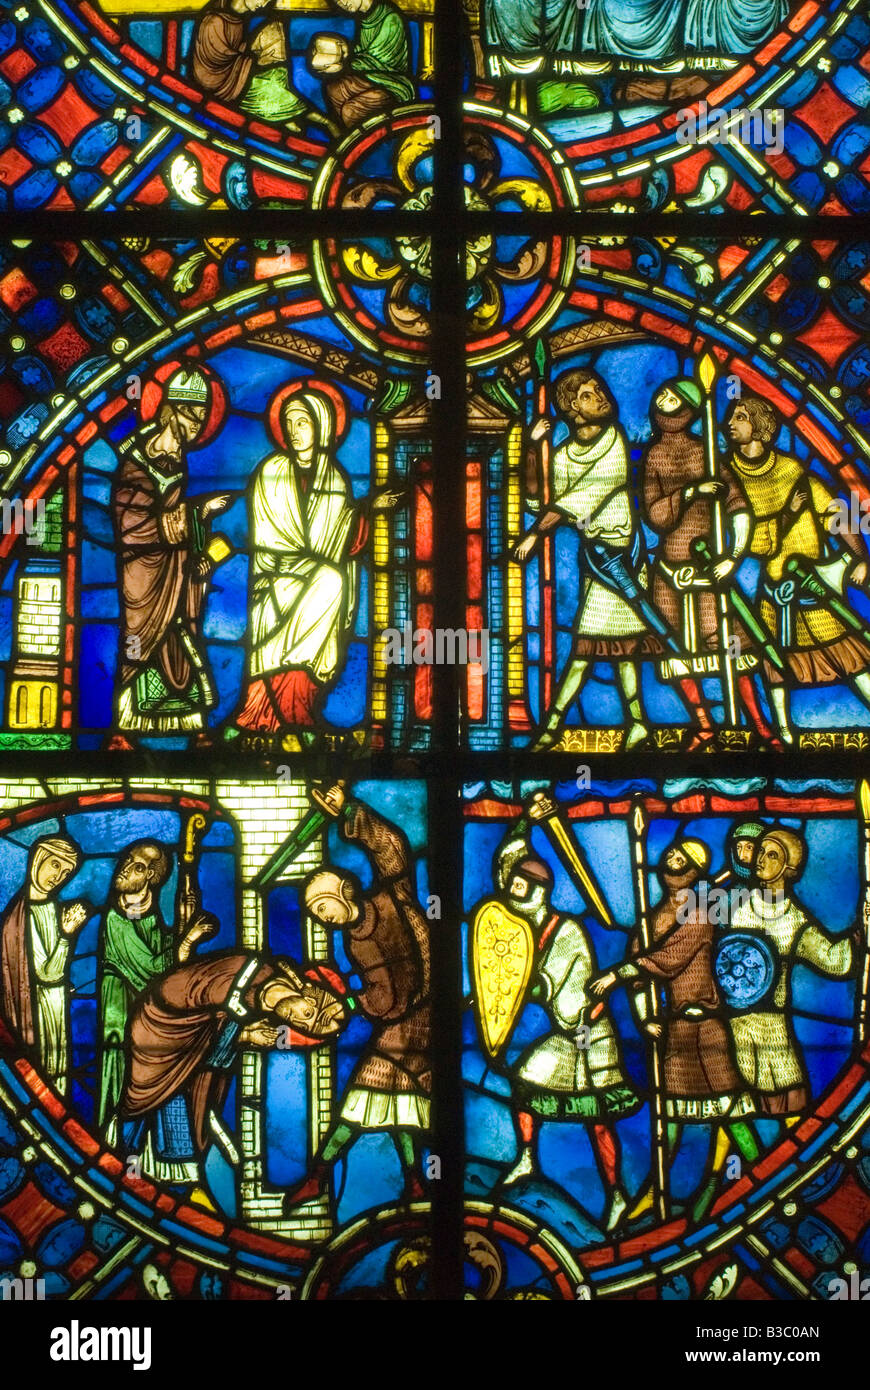 Paris, France, 'Gothic Art' Stained Glass Window on Display inside Louvre Museum 'Historic Scene of St Nicaise' Stock Photo